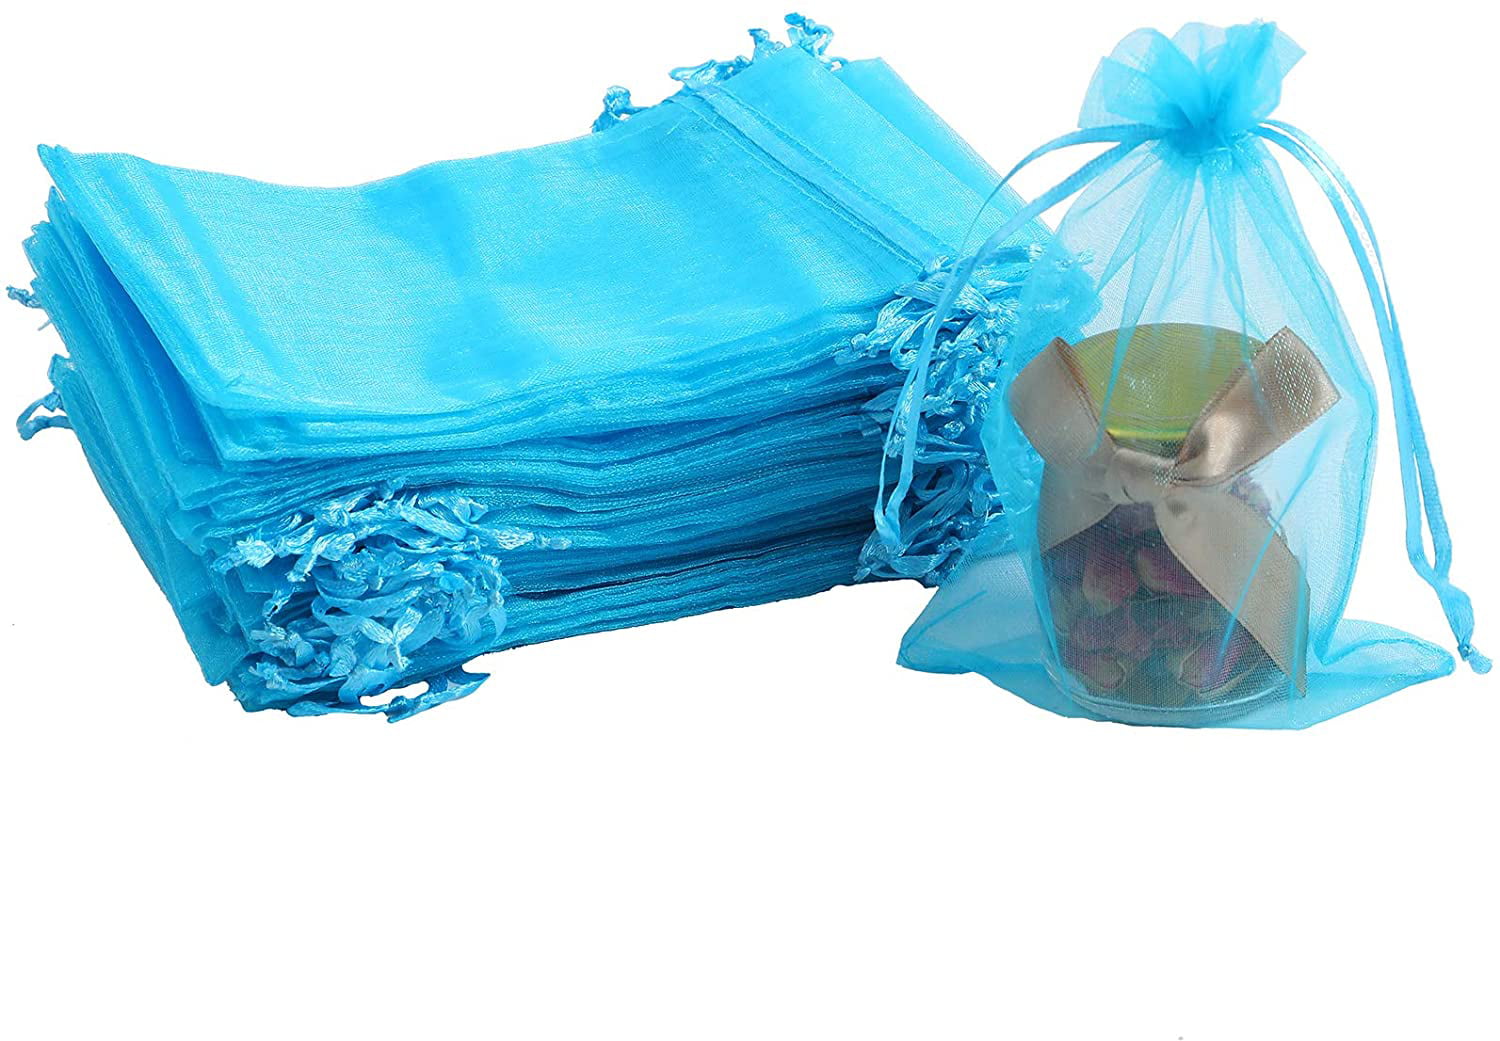 100 Drawstring Organza Bags Jewelry Packing Wedding Favor Party Gift Pouch 6"x4" 